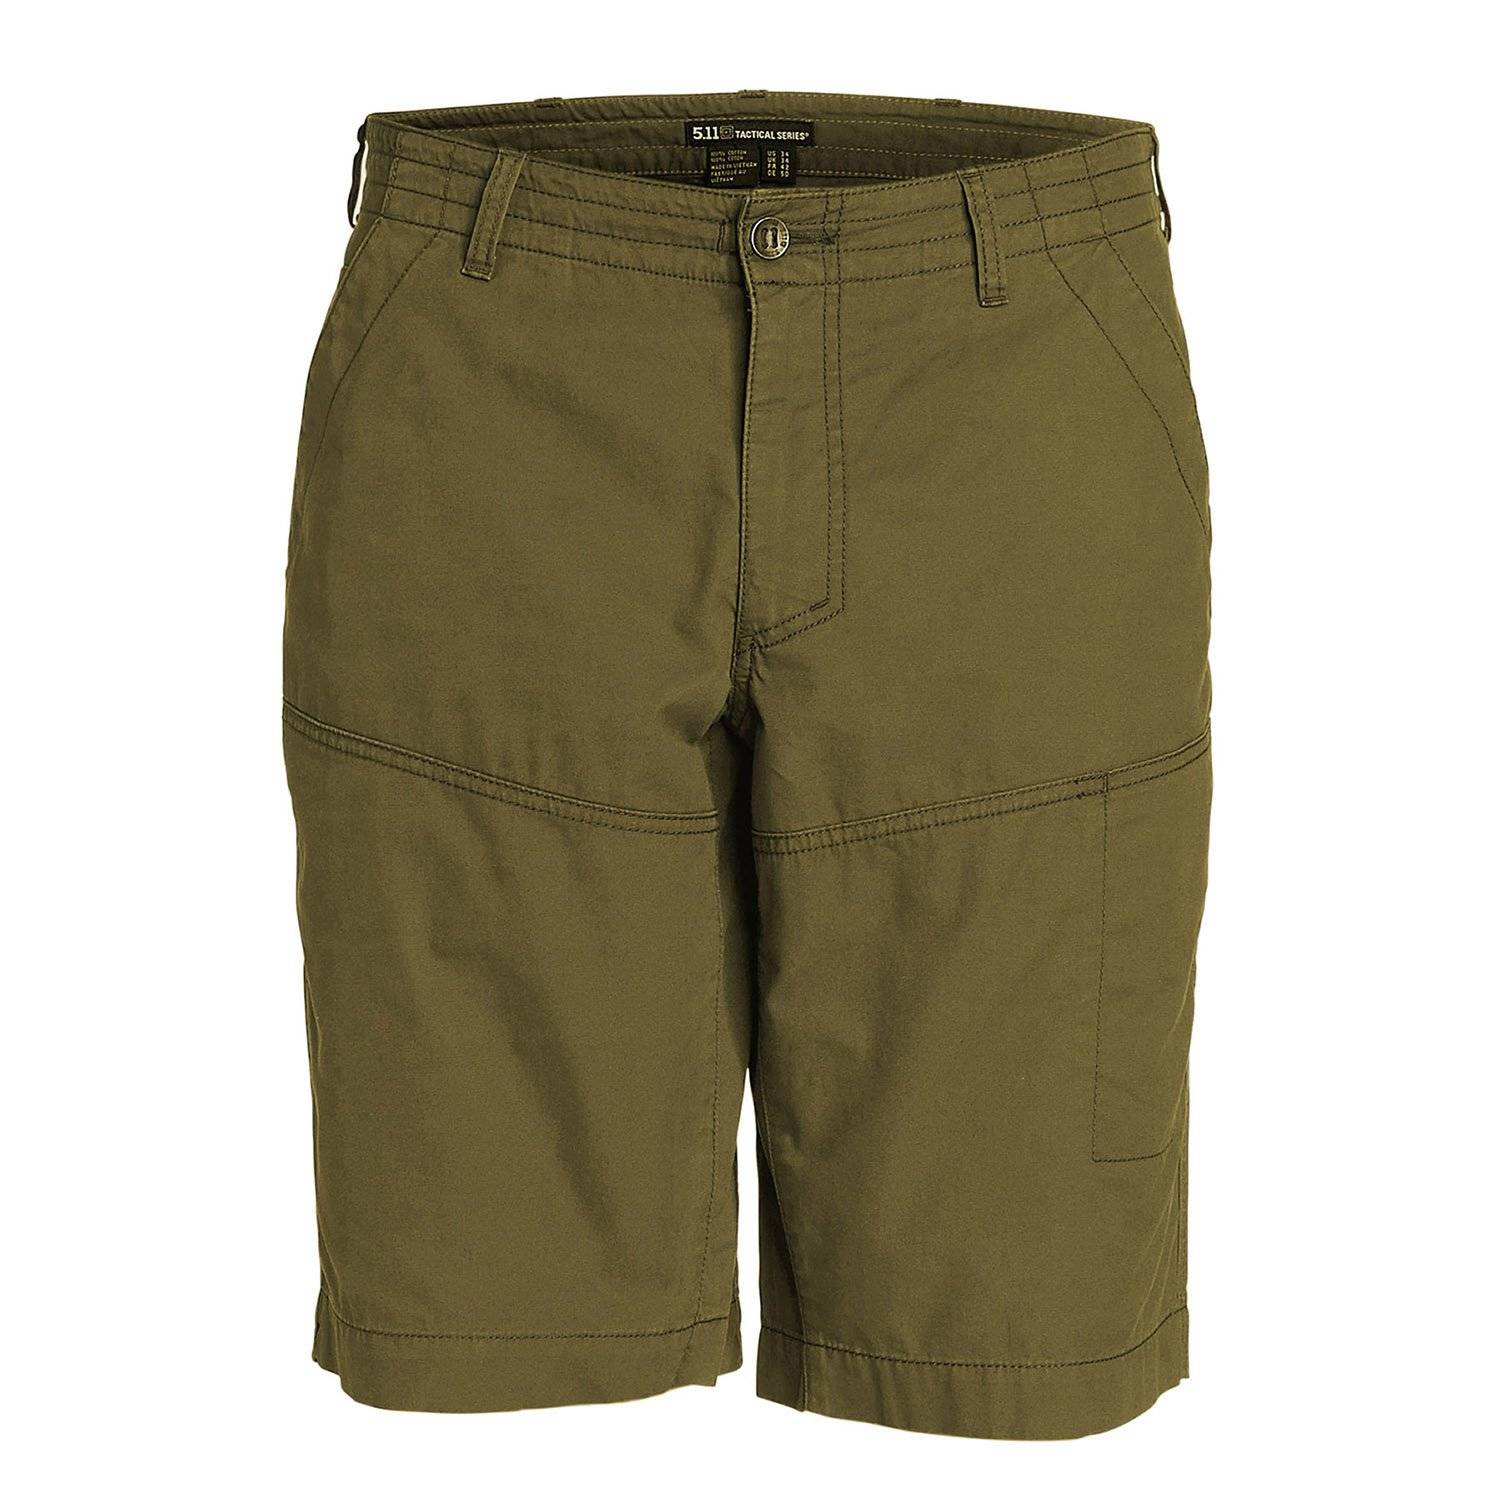 5.11 Tactical Switchback Shorts